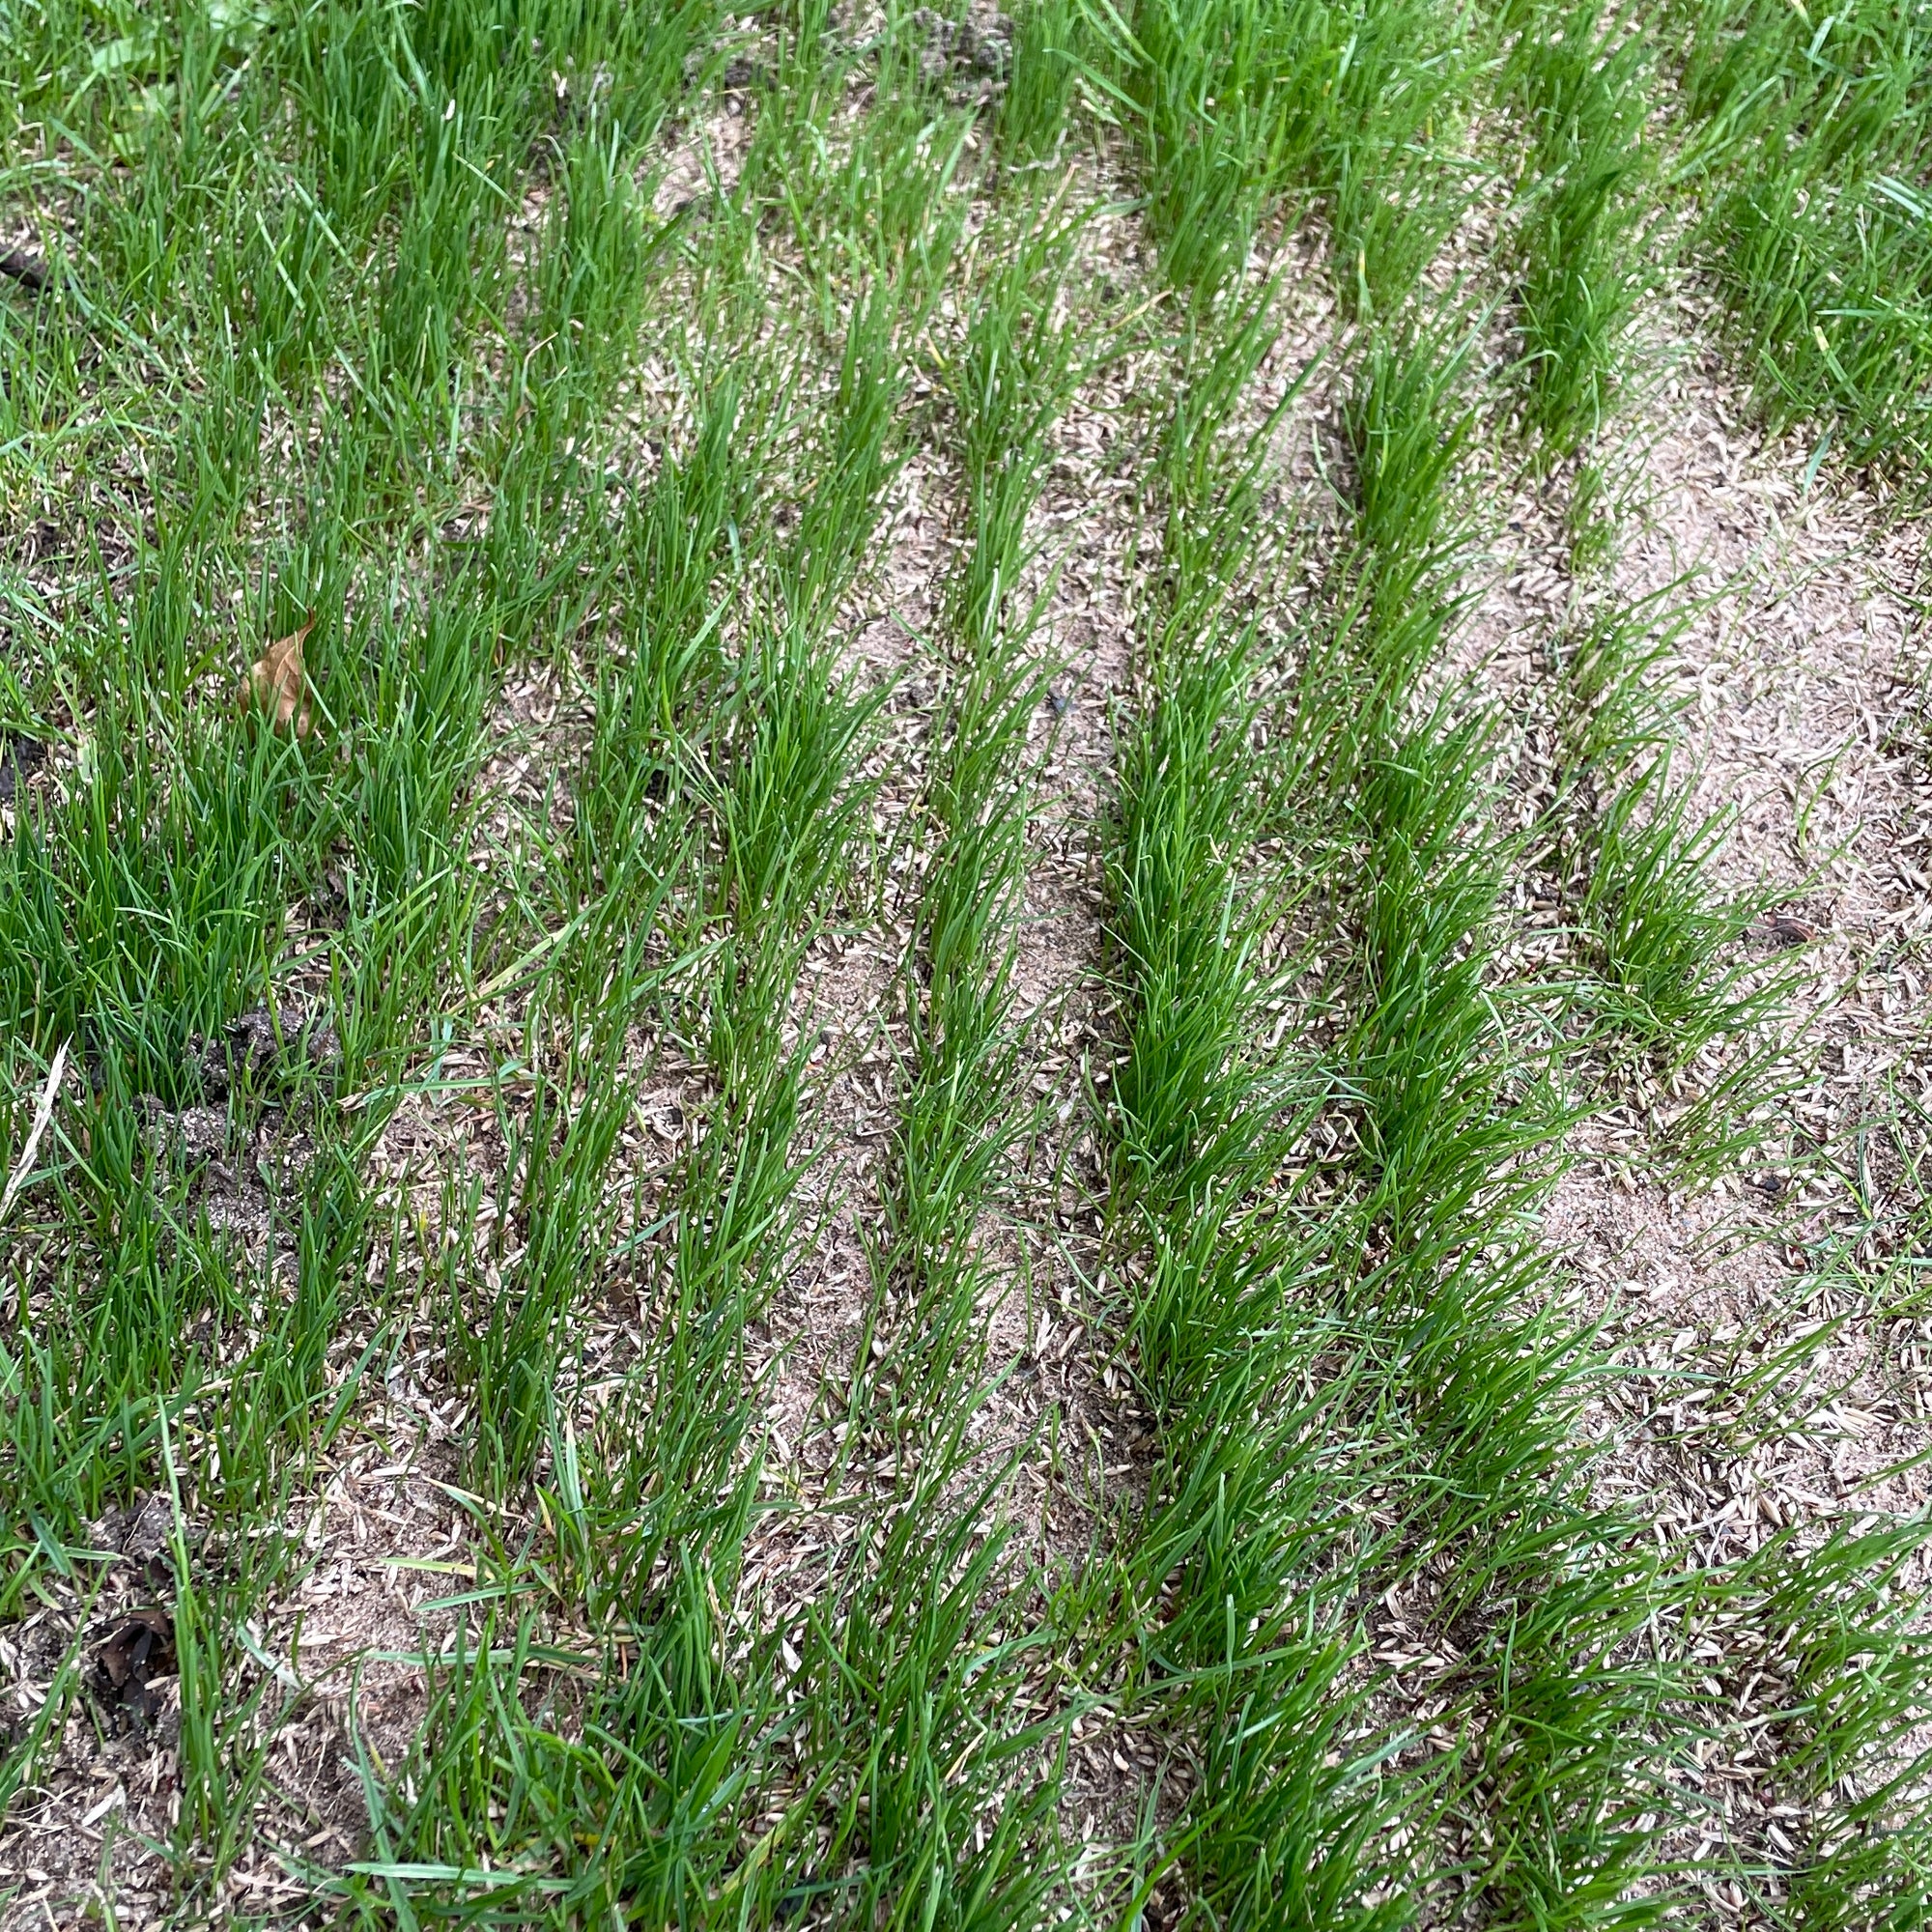 Why do we overseed after scarifying?